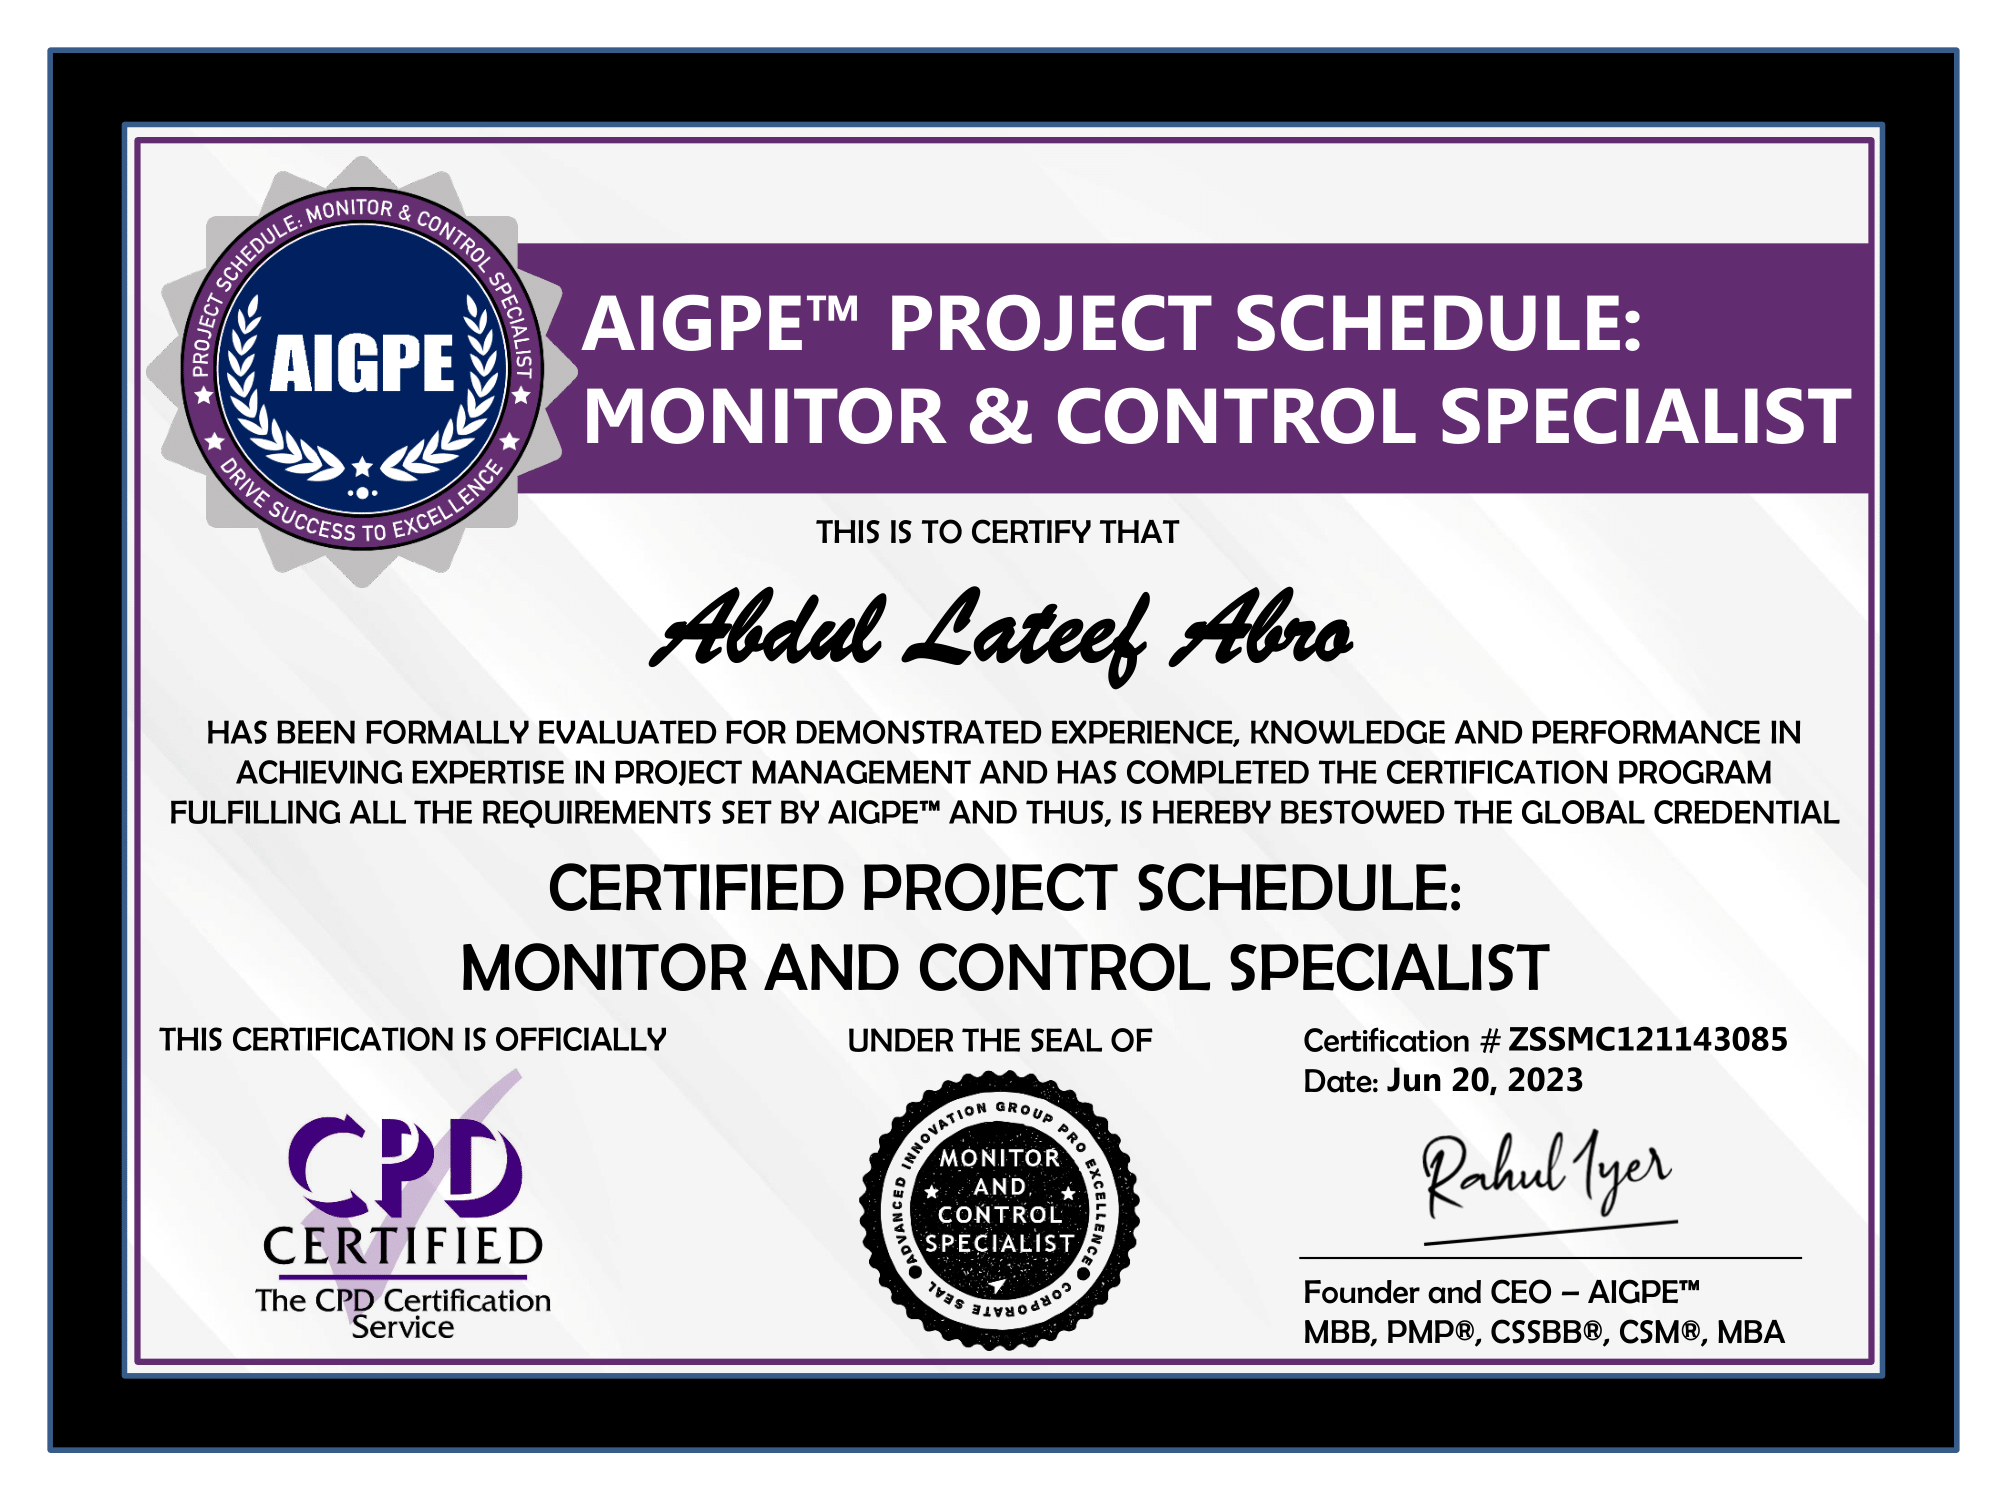 AIGPE Project Schedule Monitor and Control Specialist-1